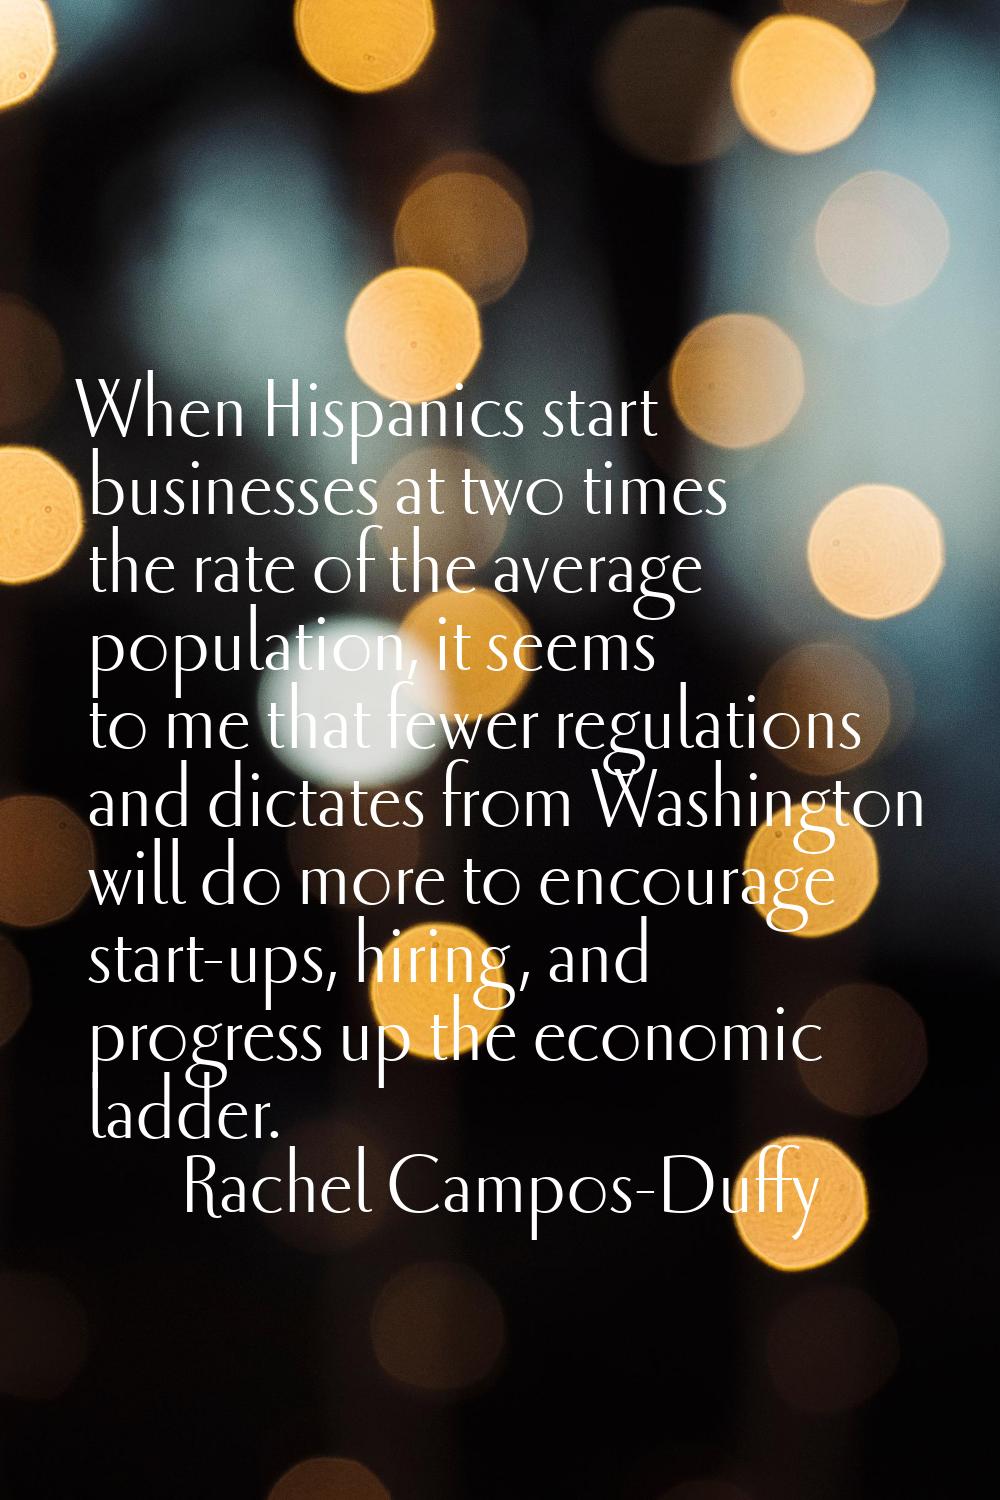 When Hispanics start businesses at two times the rate of the average population, it seems to me tha